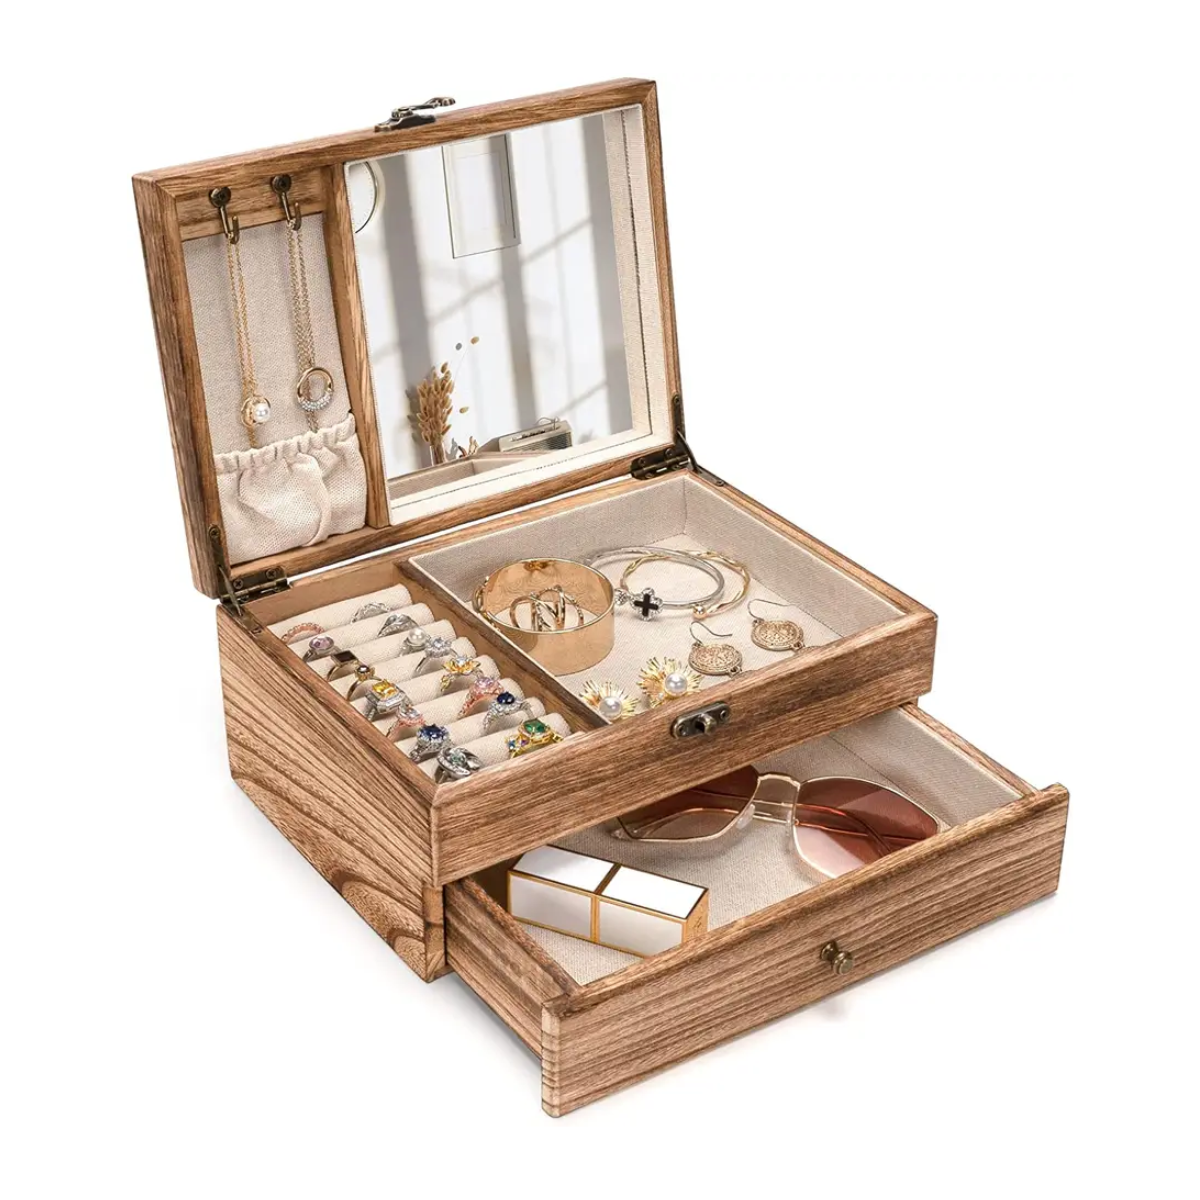 10. Exquisite Wooden Jewelry Box: A Timeless and Personalized 7 year Anniversary Gift Idea